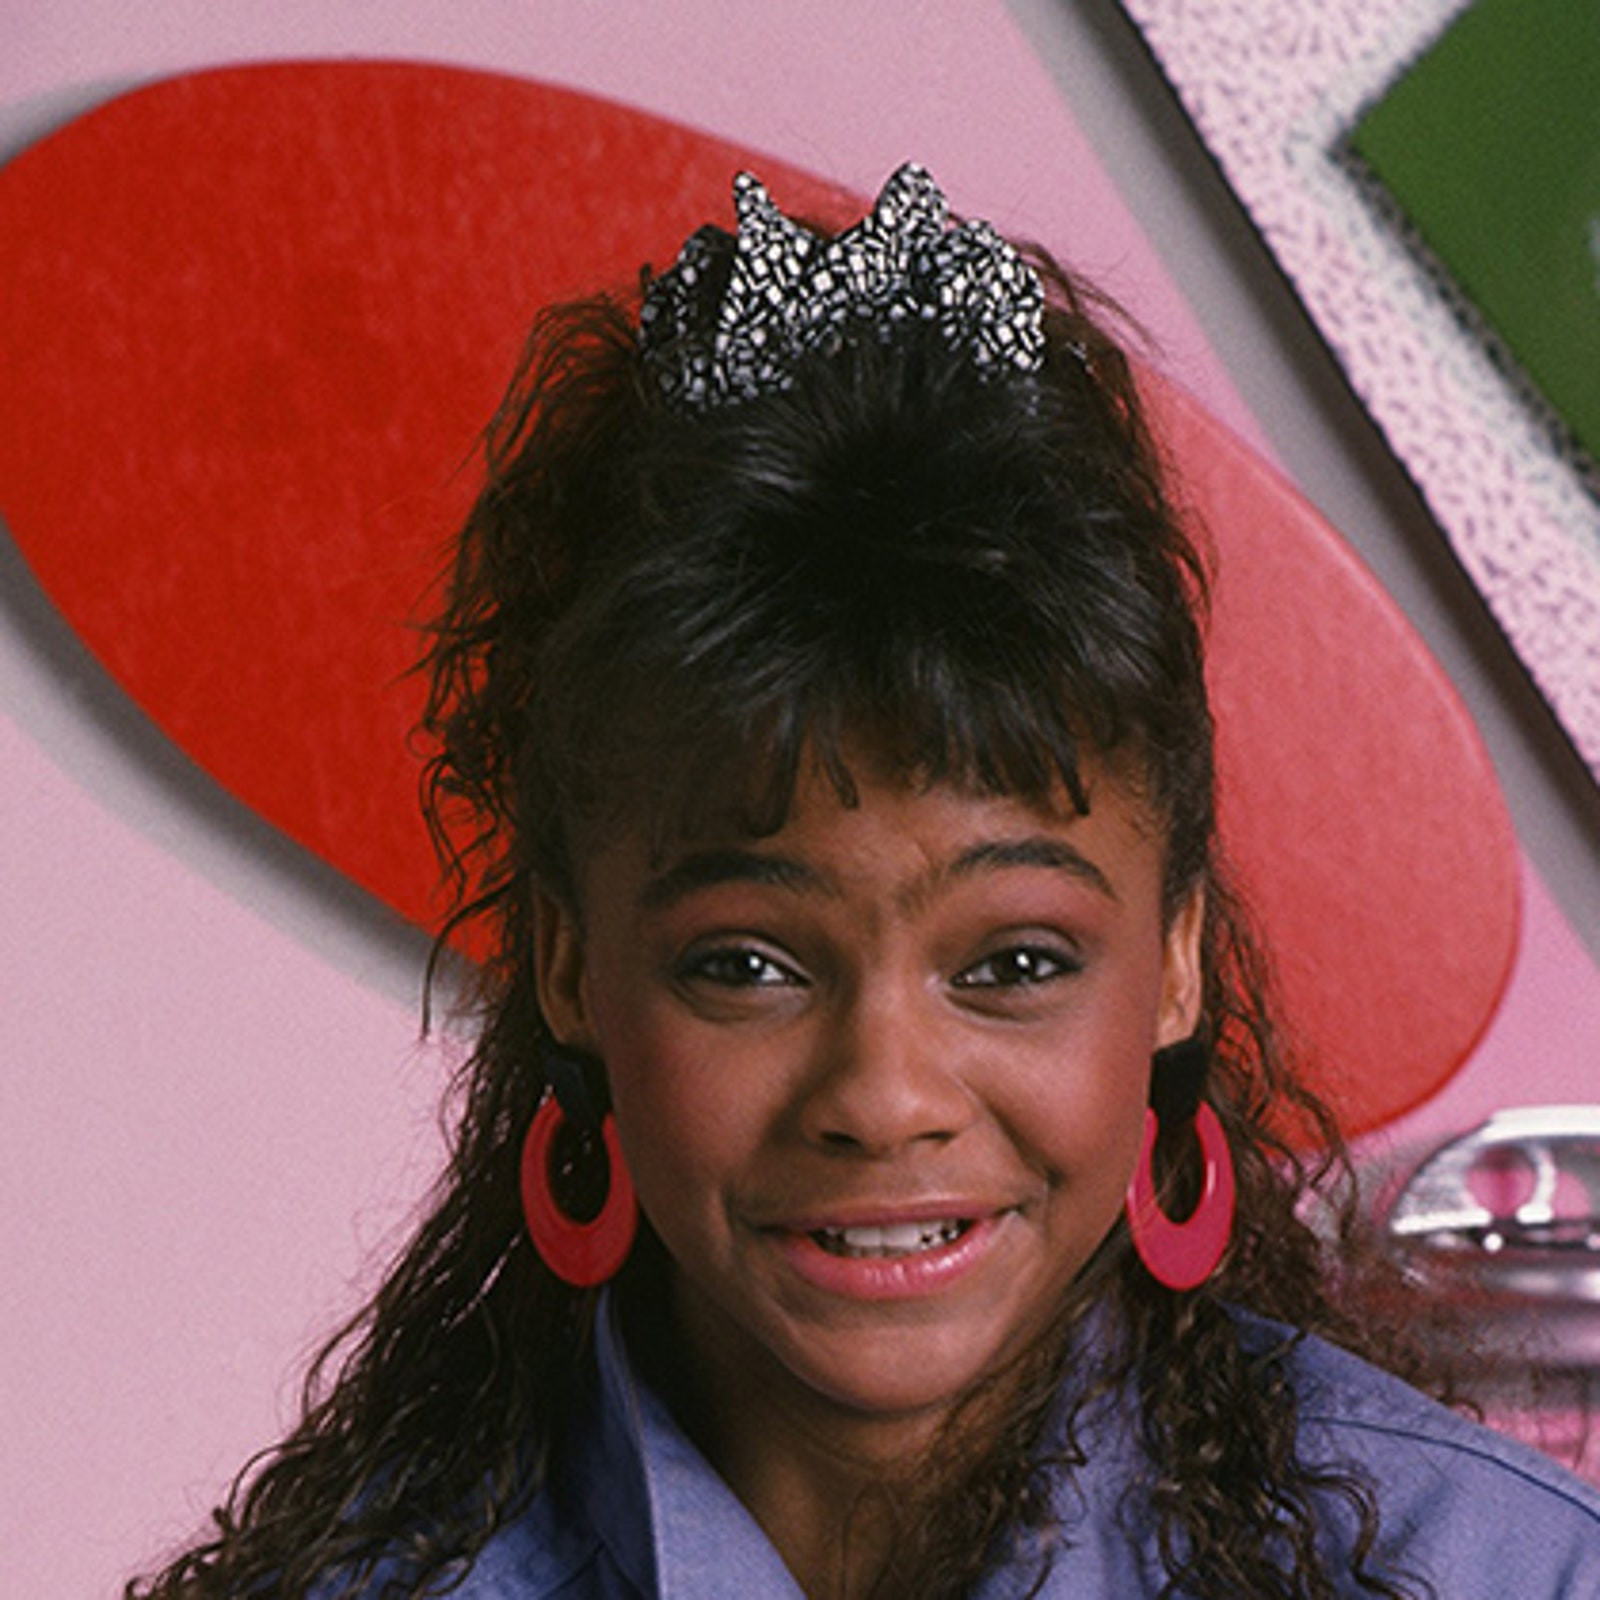 80S Hairstyles For Black Women
 13 Hairstyles You Totally Wore in the 80s Allure